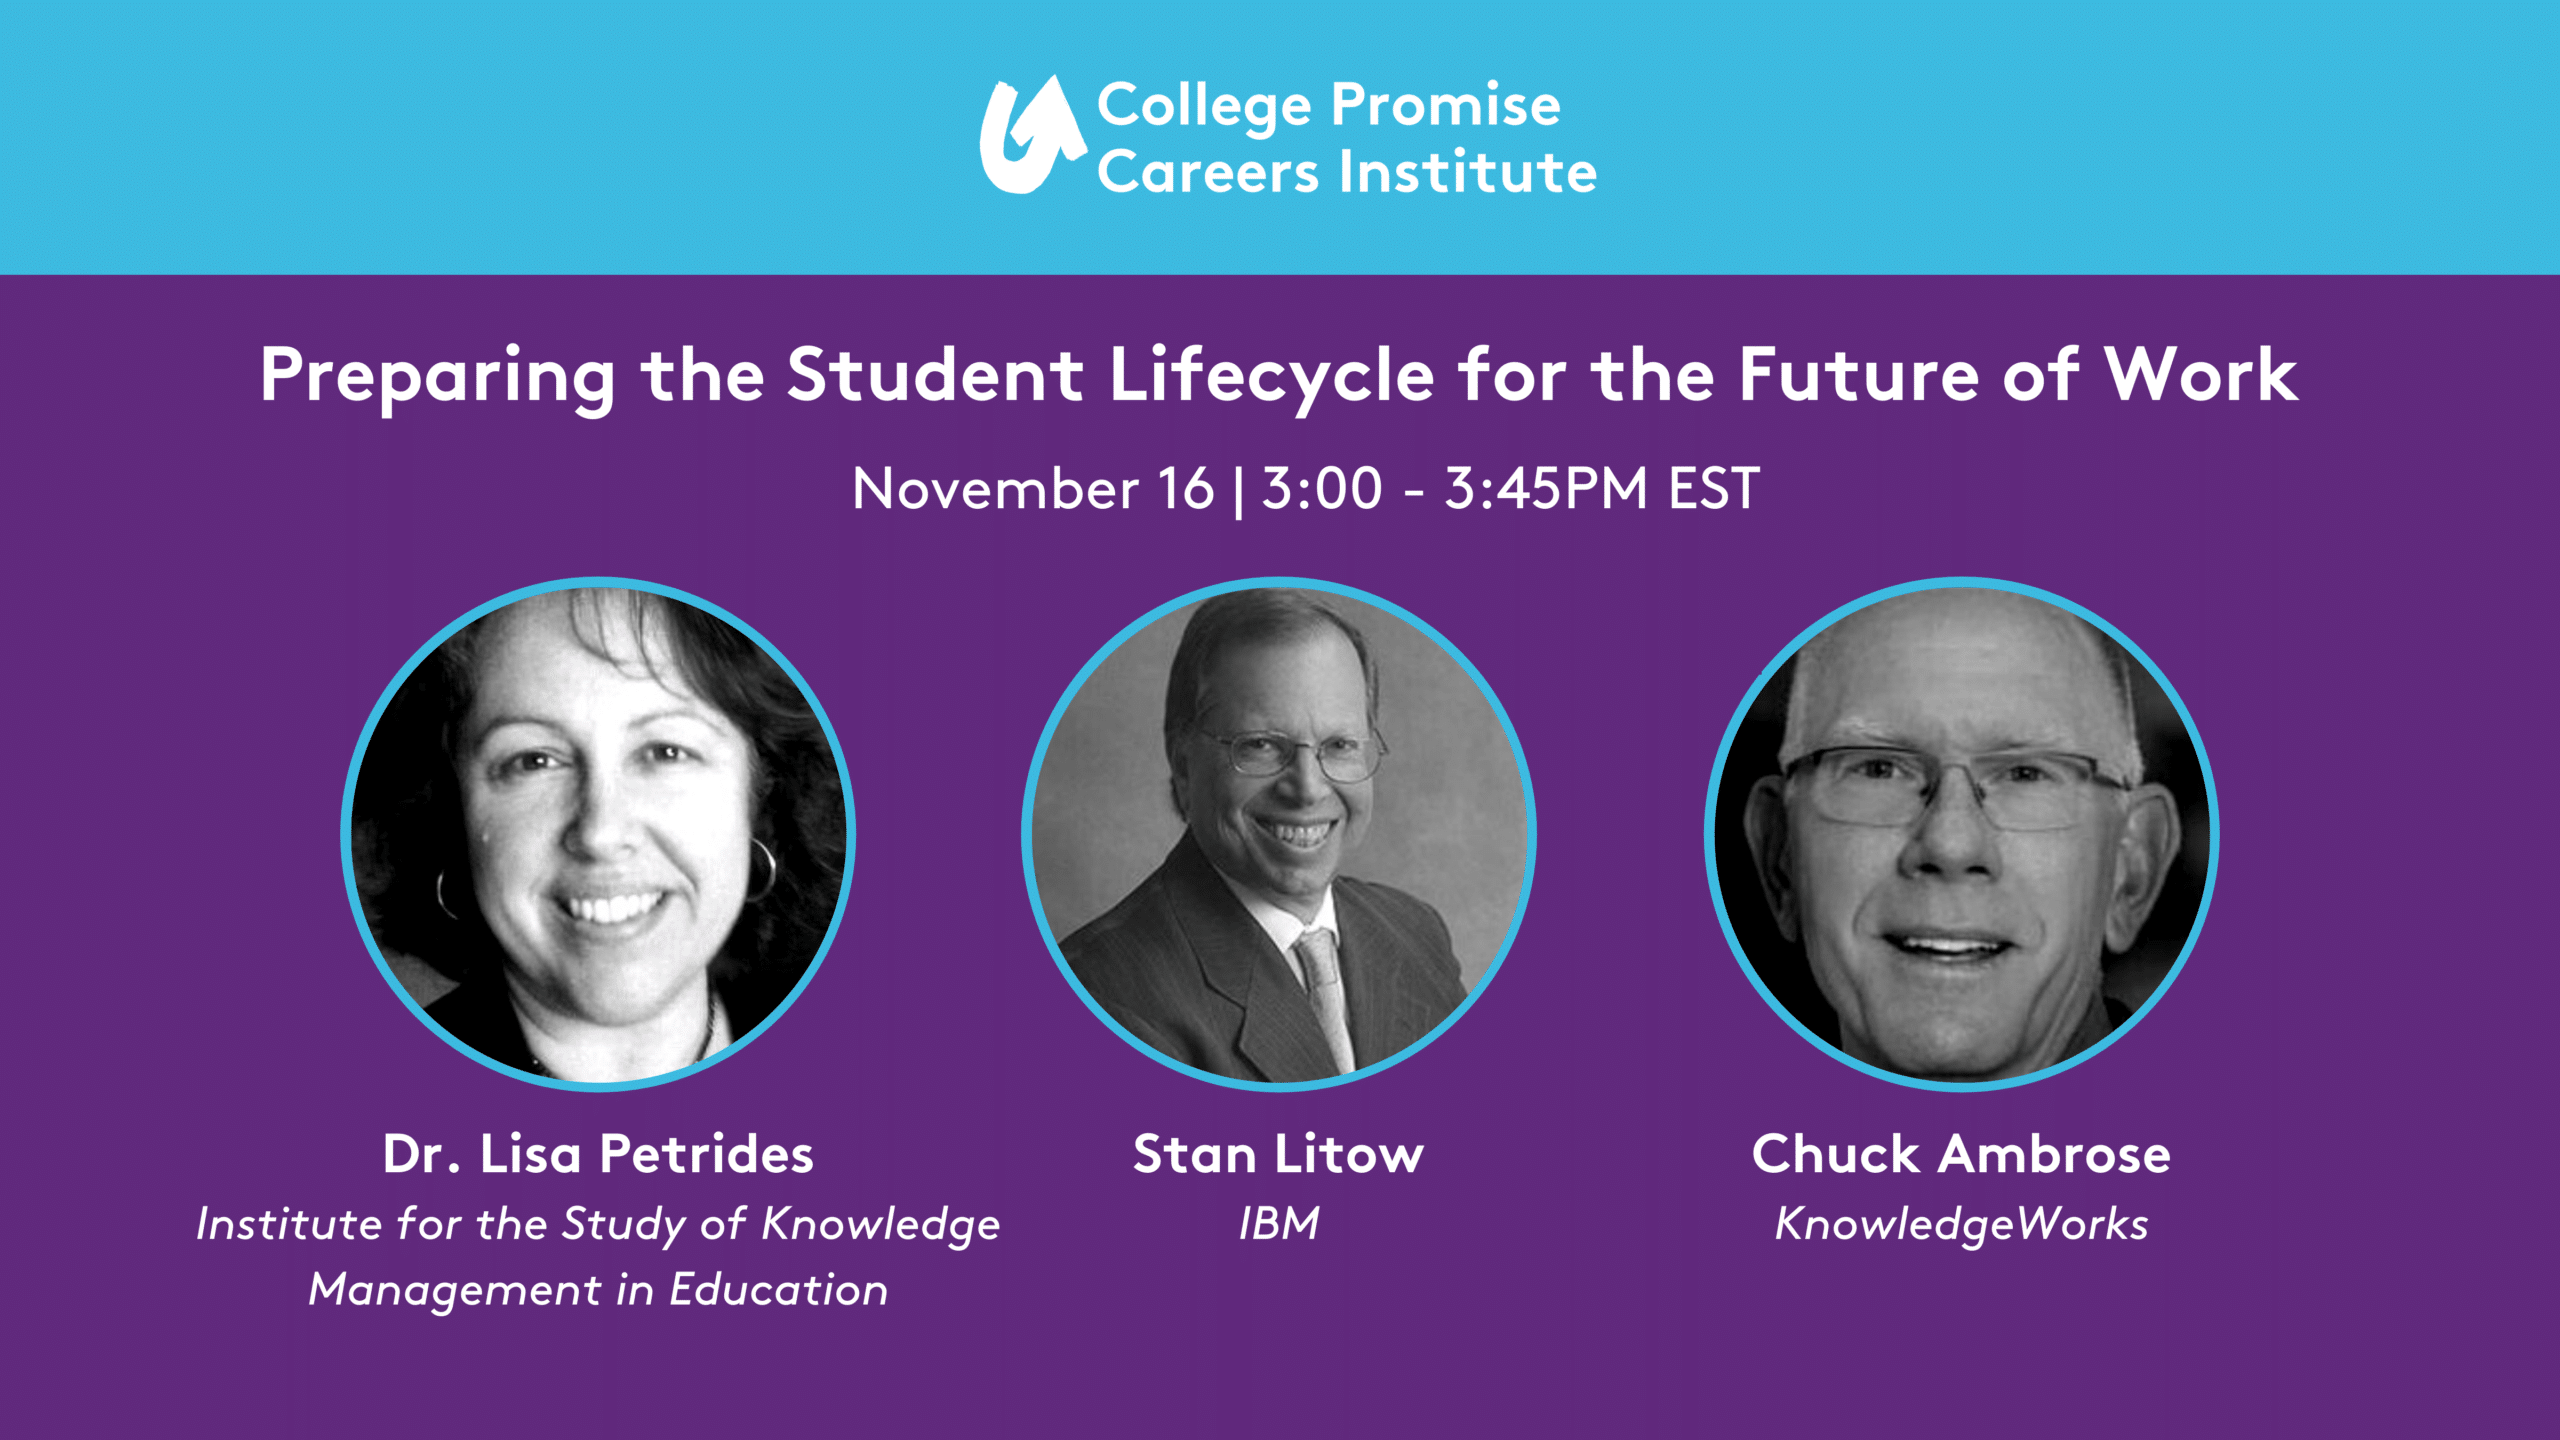 Preparing Students for a Changing Workforce, November 16, 3:00-3:45, EST. Lisa Petrides - Founder & CEO, Institute for the Study of Knowledge Management (facilitator); Stan Litow - President Emeritus, IBM Foundation & Vice President Emeritus, IBM's Global Corporate Citizenship; Chuck Ambrose - President and CEO, KnowledgeWorks.